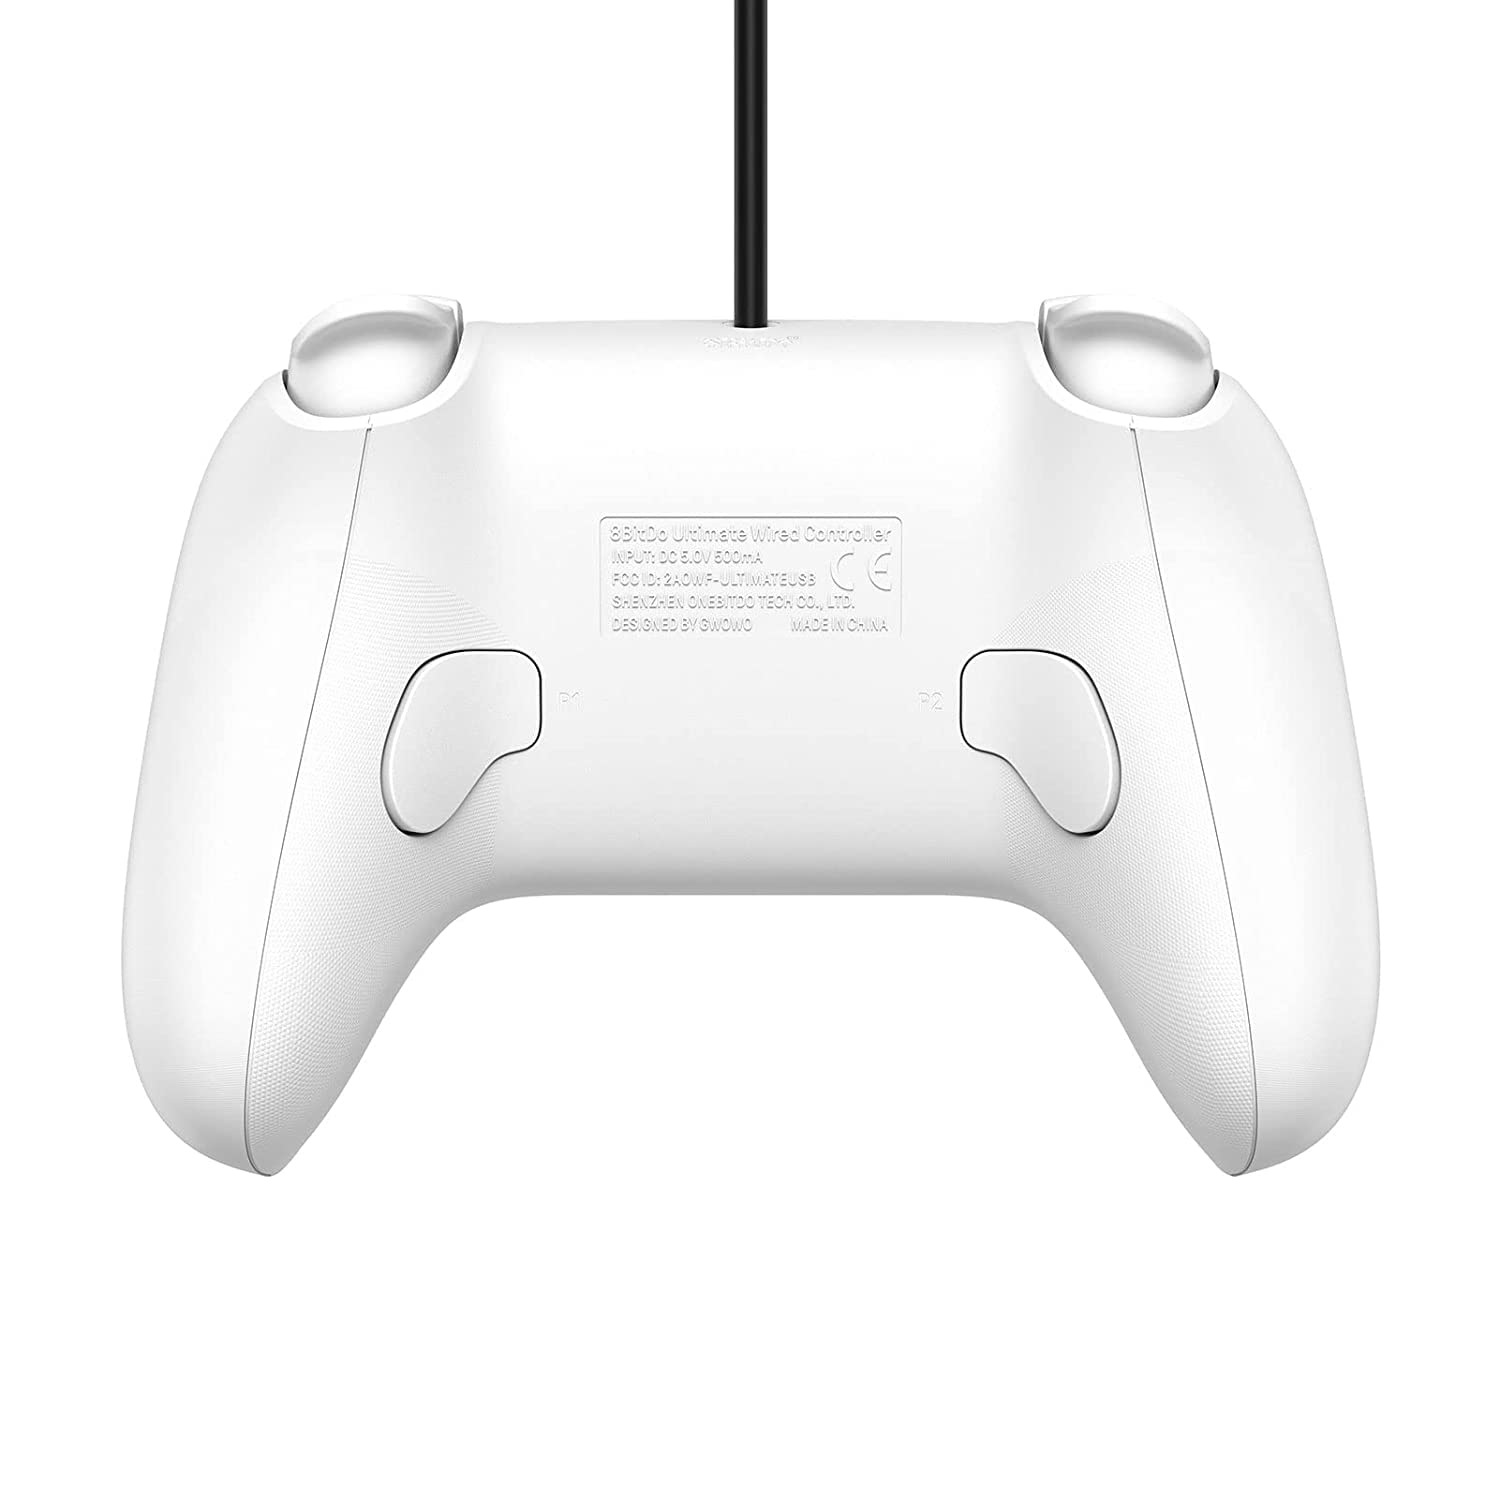 8Bitdo Ultimate Wired Controller, USB Wired Controller for PC Windows 10, Android, Steam Deck, Raspberry Pi and Switch (White)